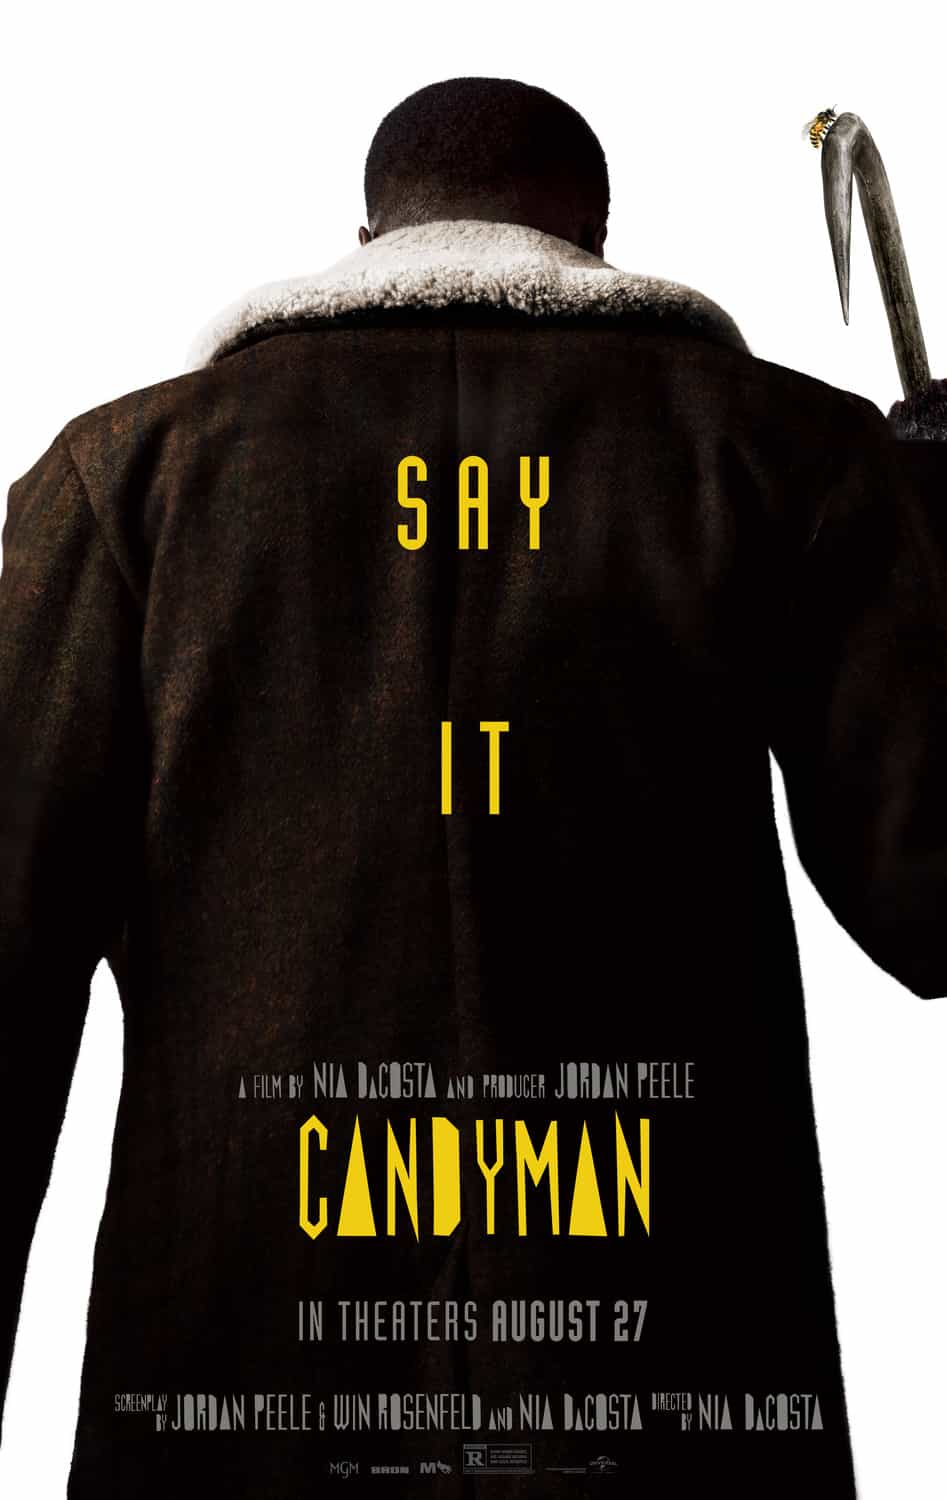 US Box Office Weekend Report 27th - 29th August 2021:  Candyman remake hits the top of the US box office on its debut weekend